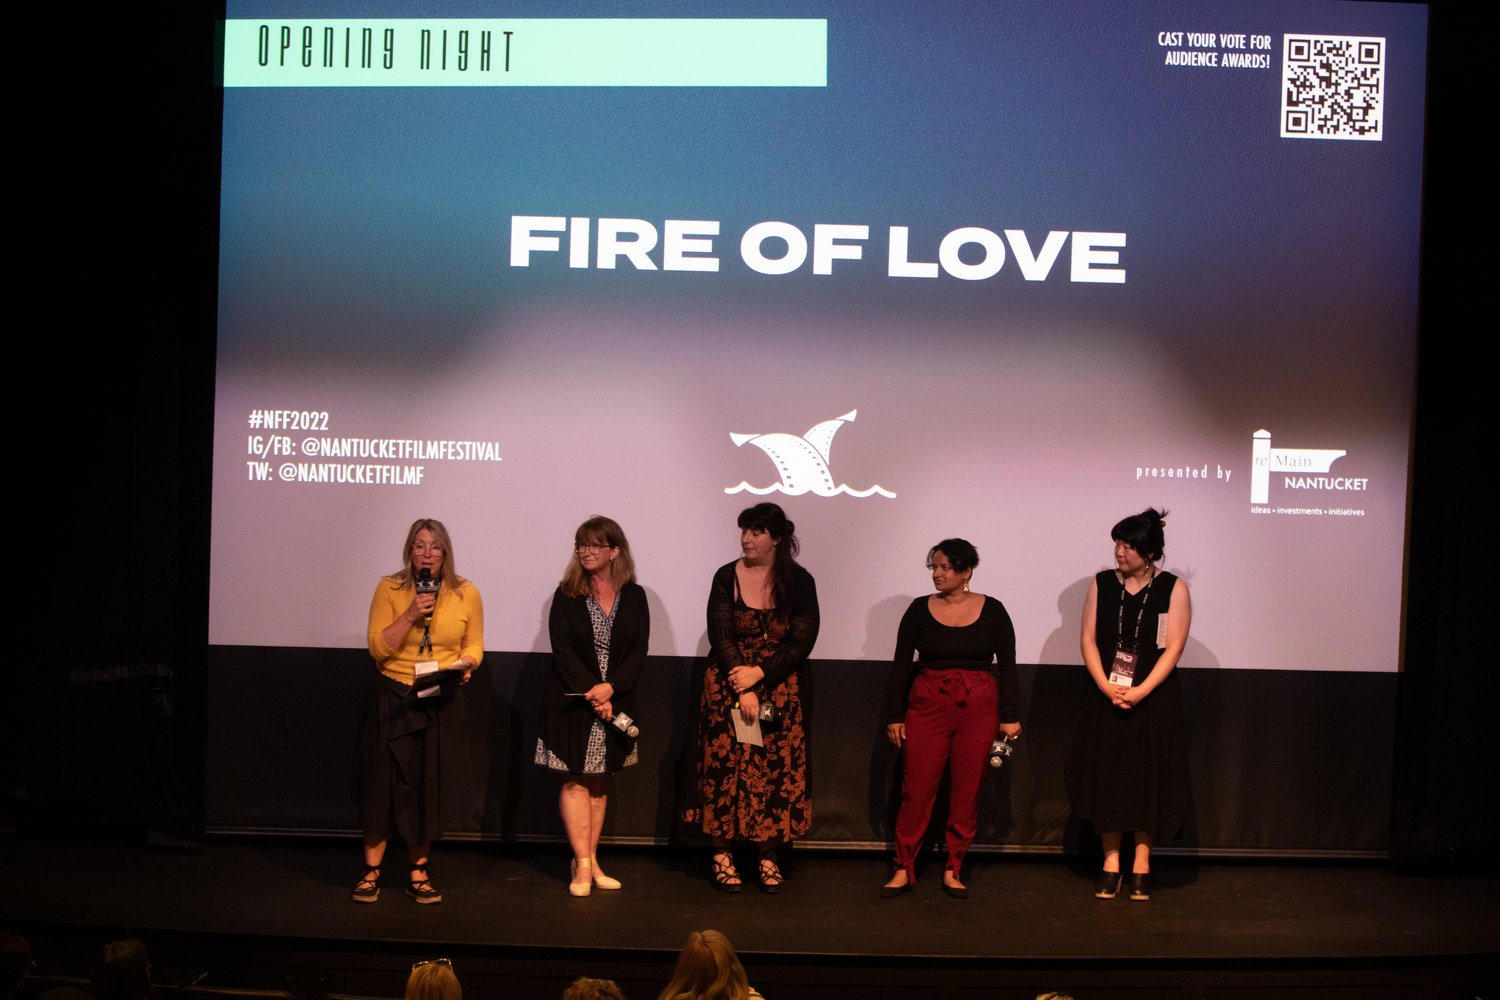 The "Fire of Love" filmmakers on stage opening night at the Dreamland.